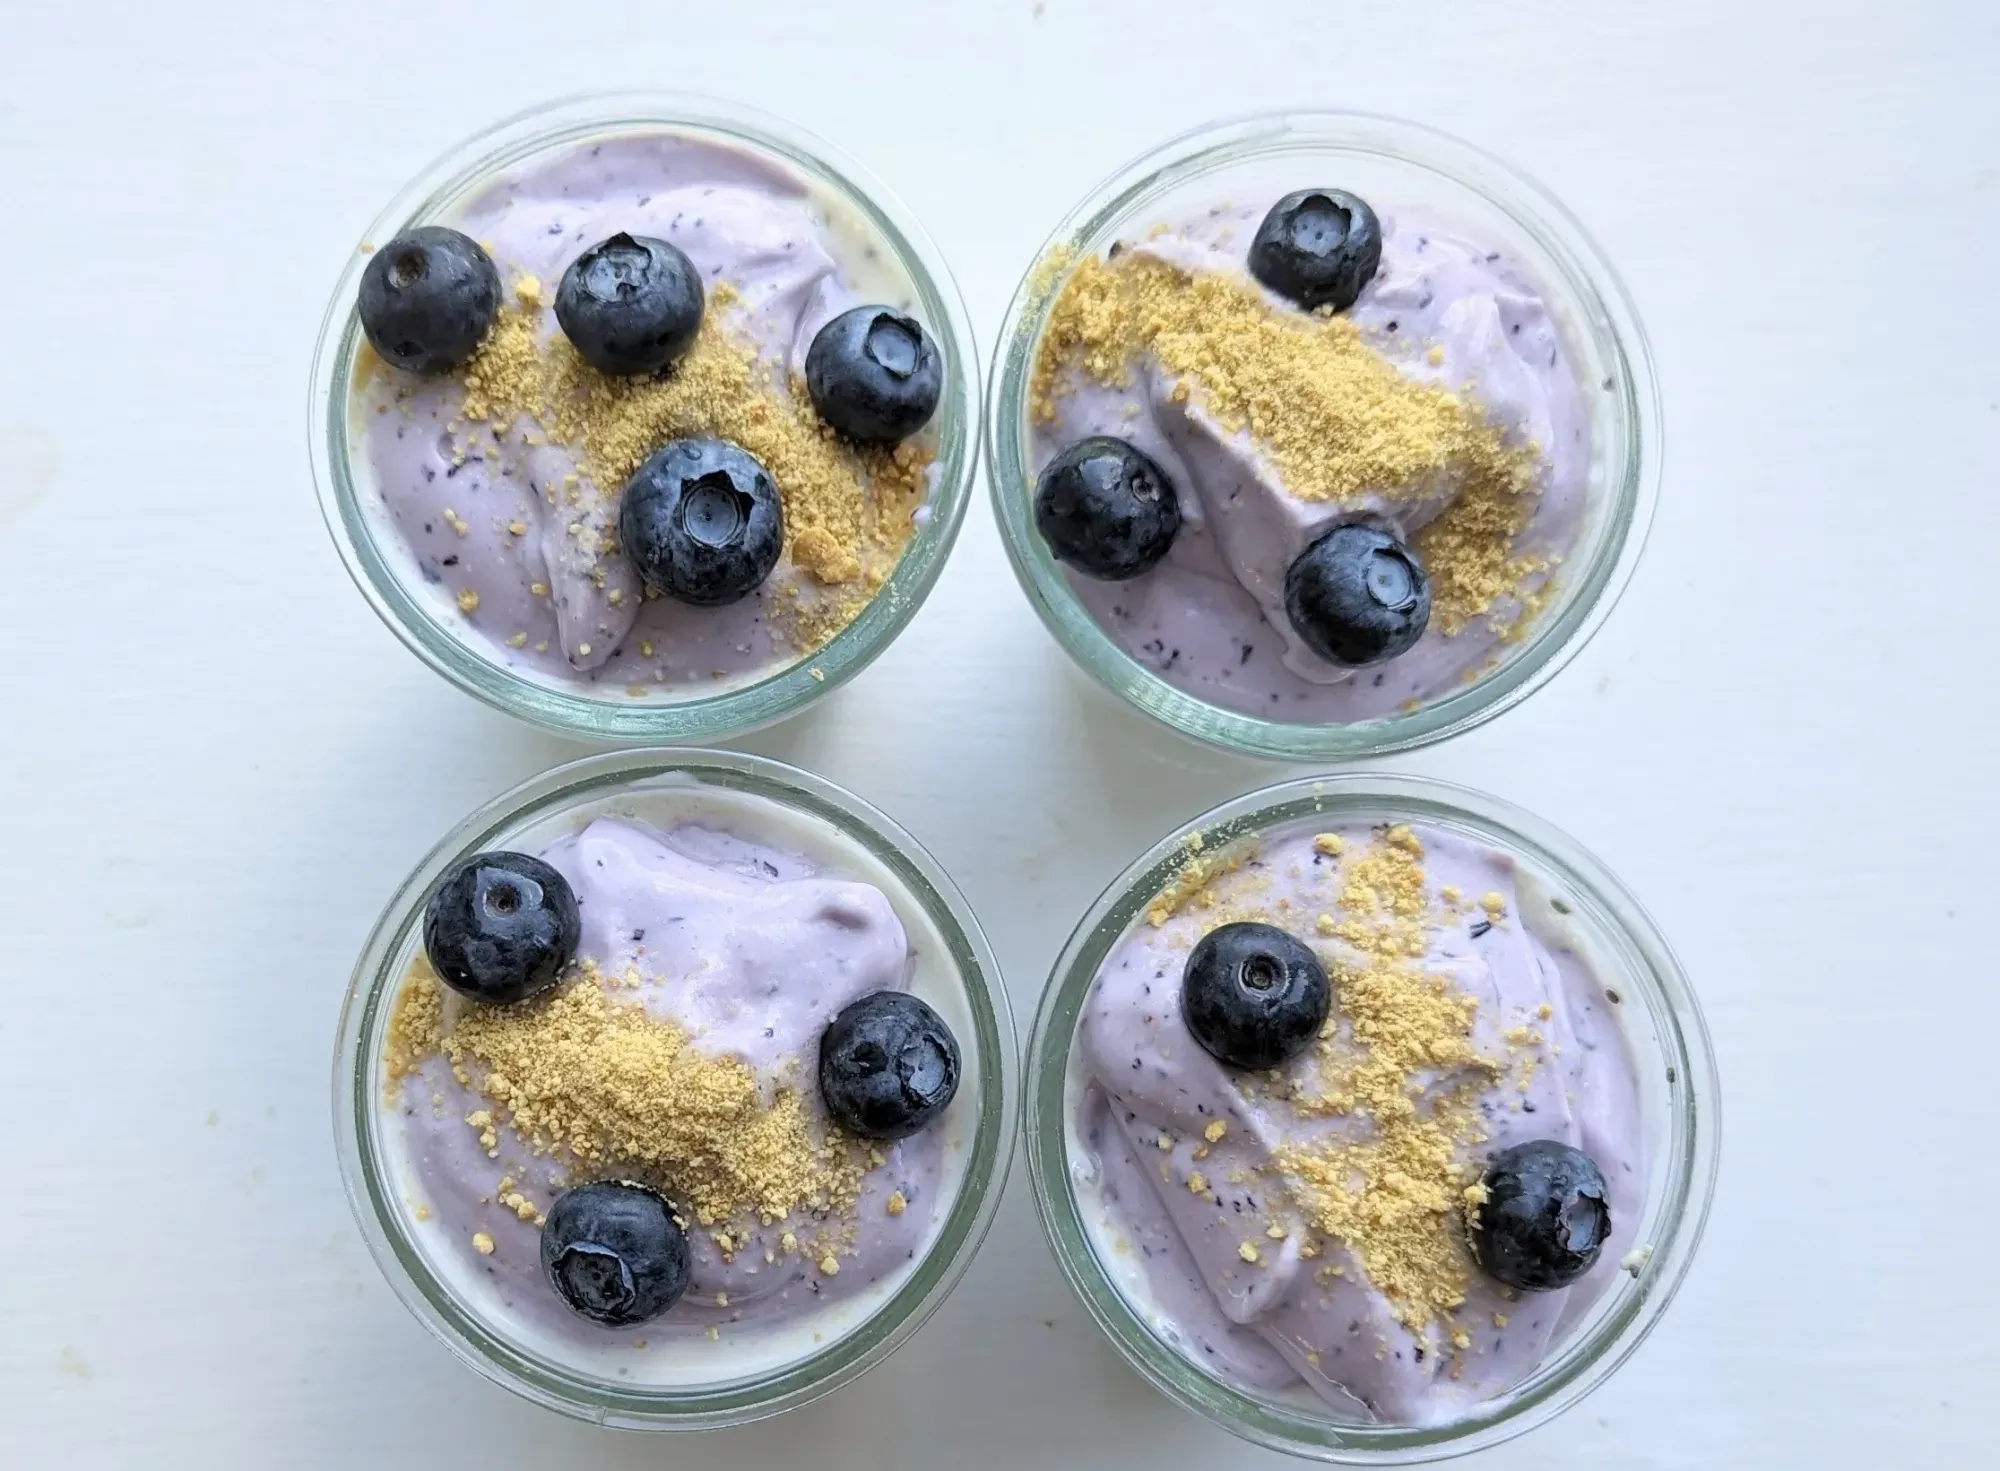 Blueberry overnight oats topped with graham cracker crumbs and blueberries